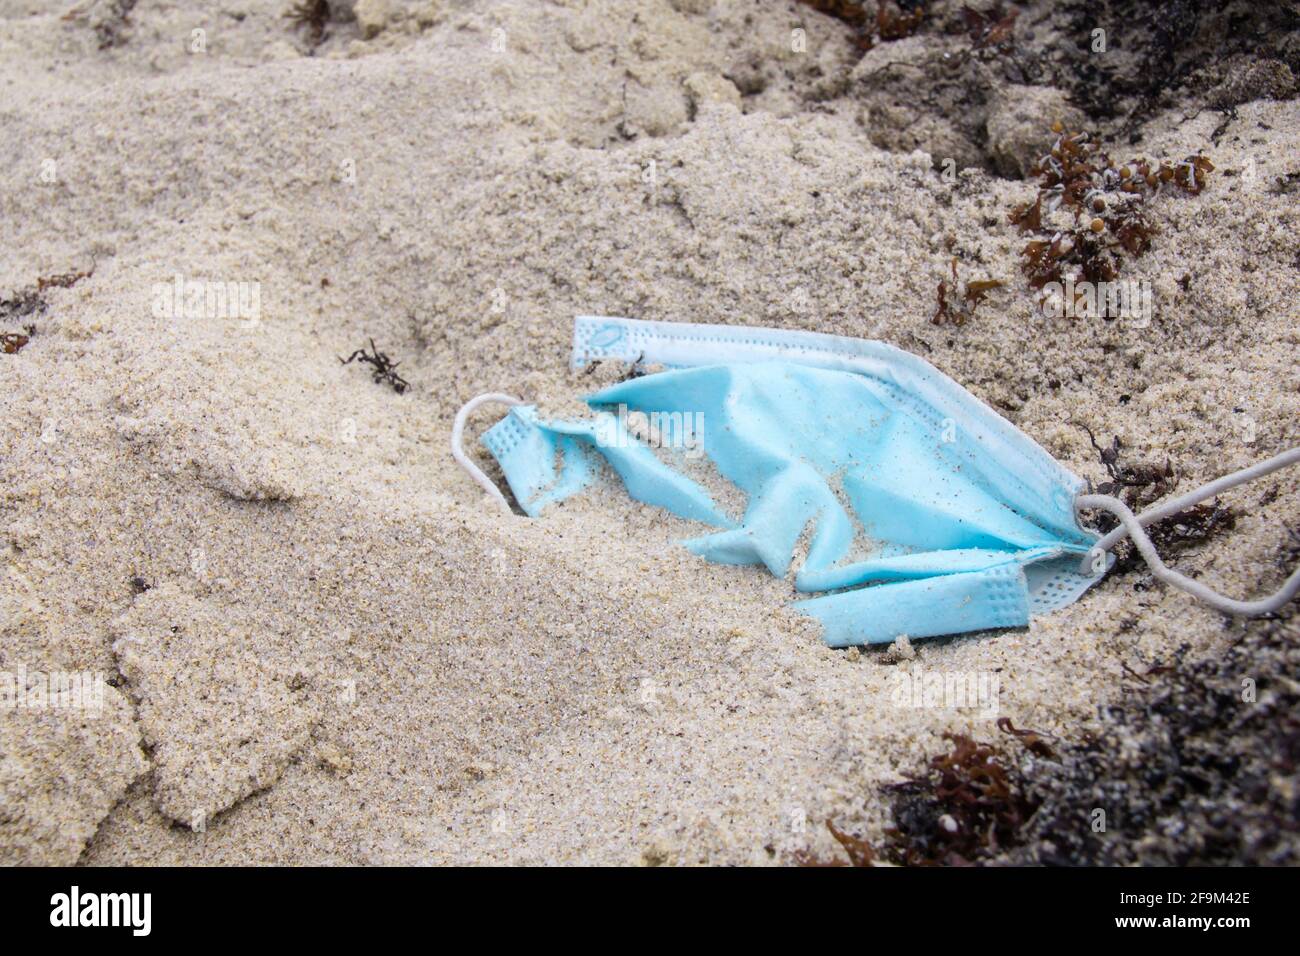 A discarded pale blue surgical medical face mask lying in the sand on a beach in Barbados, surrounded by seaweed. Partially buried. Concept. Stock Photo